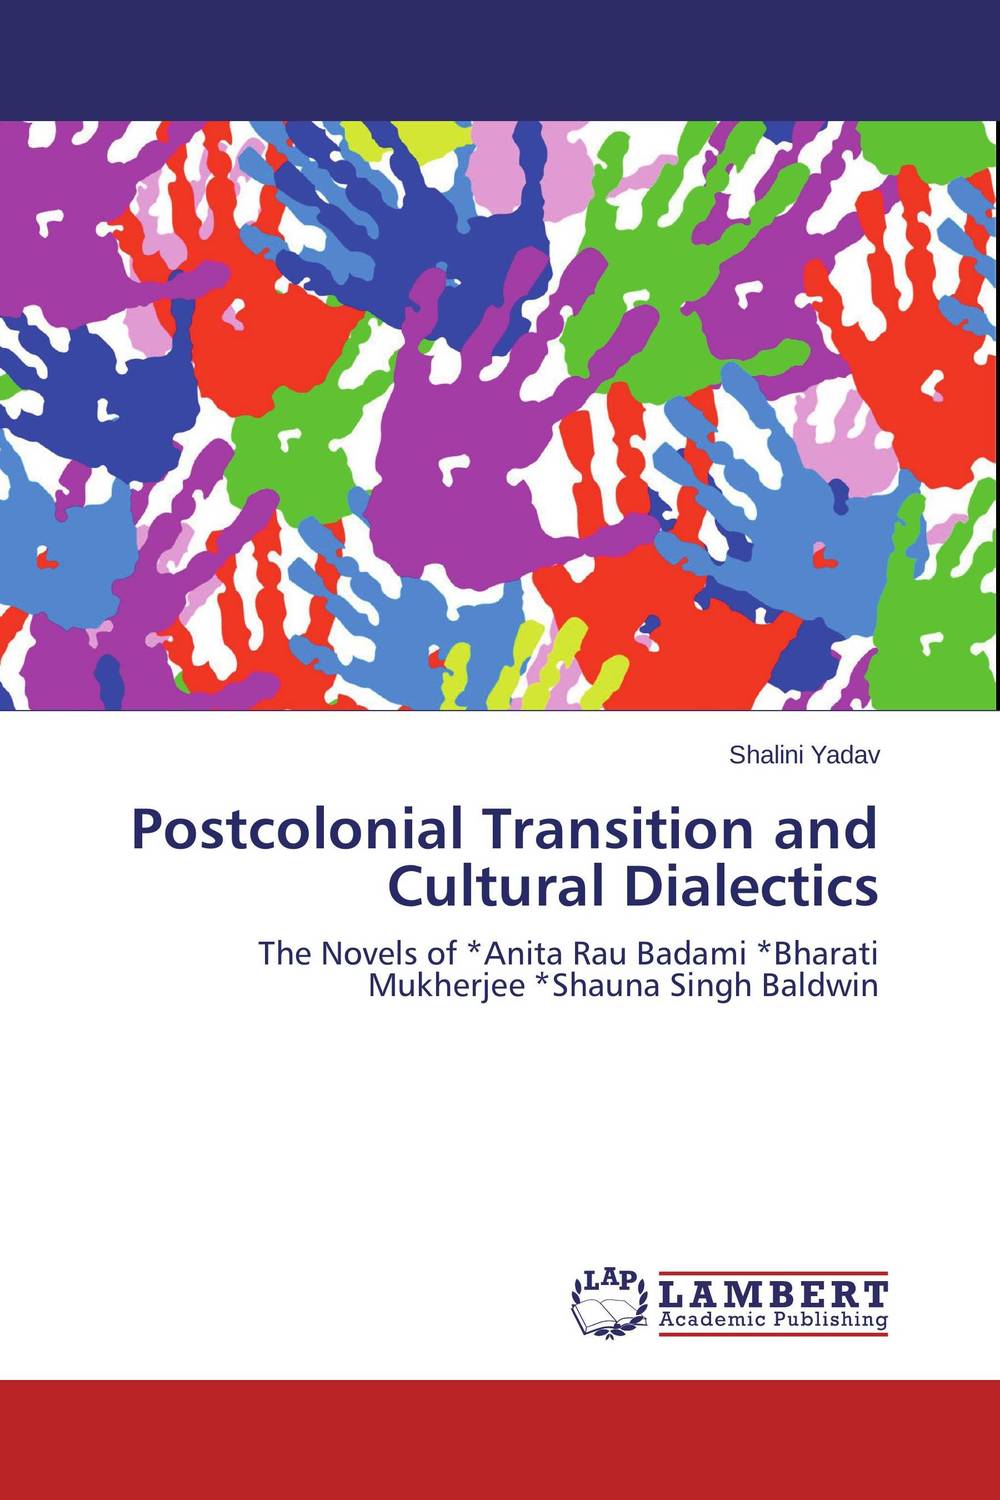 Postcolonial Transition and Cultural Dialectics